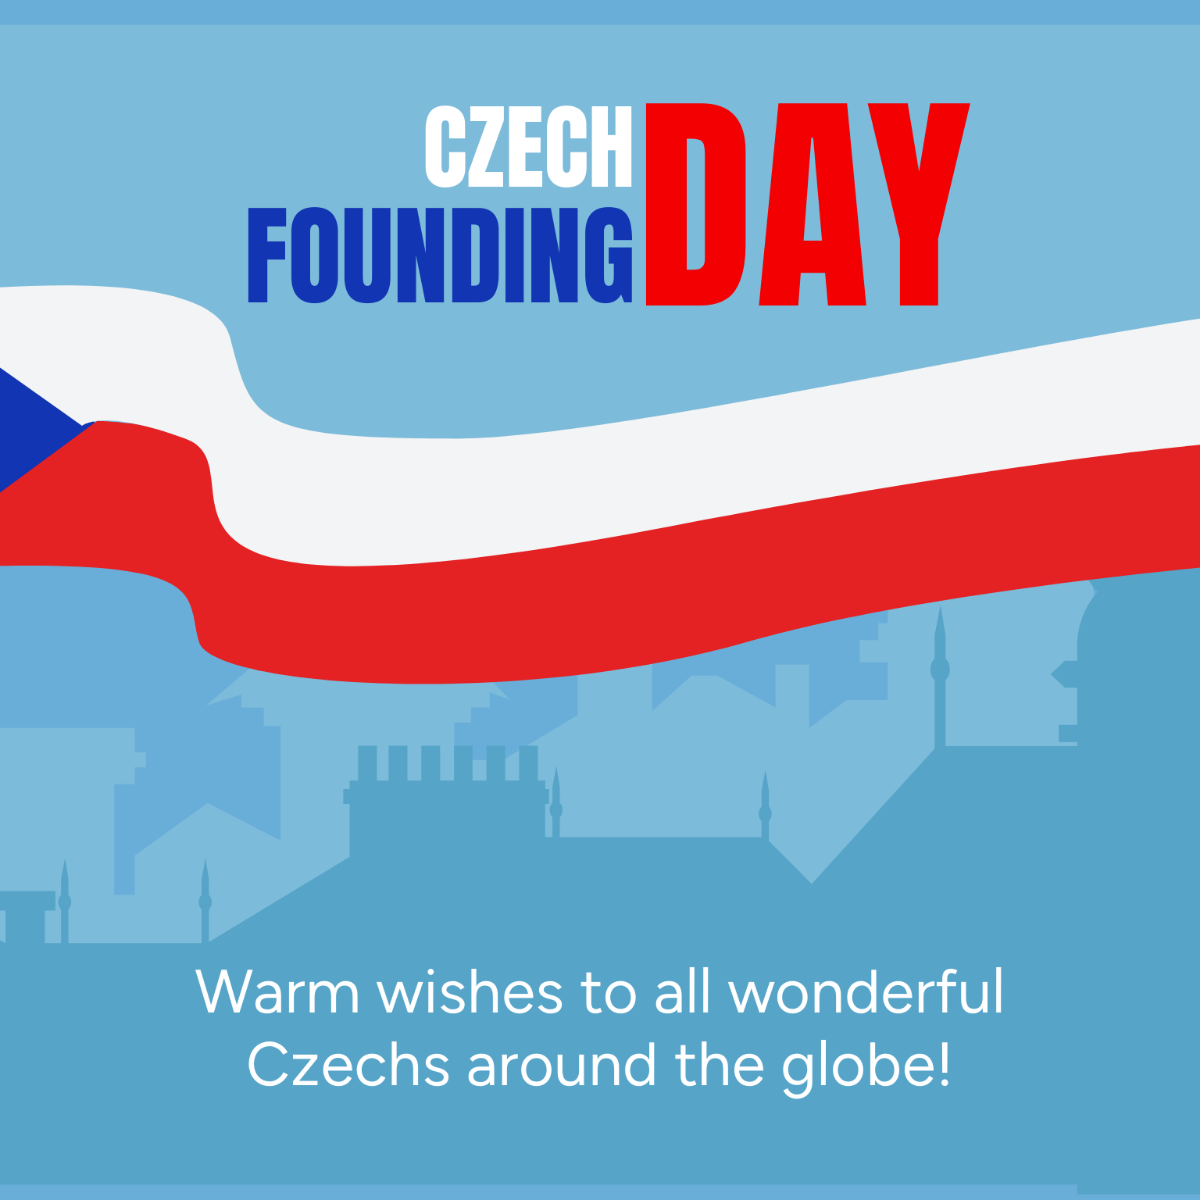 Free Czech Founding Day Wishes Vector Template